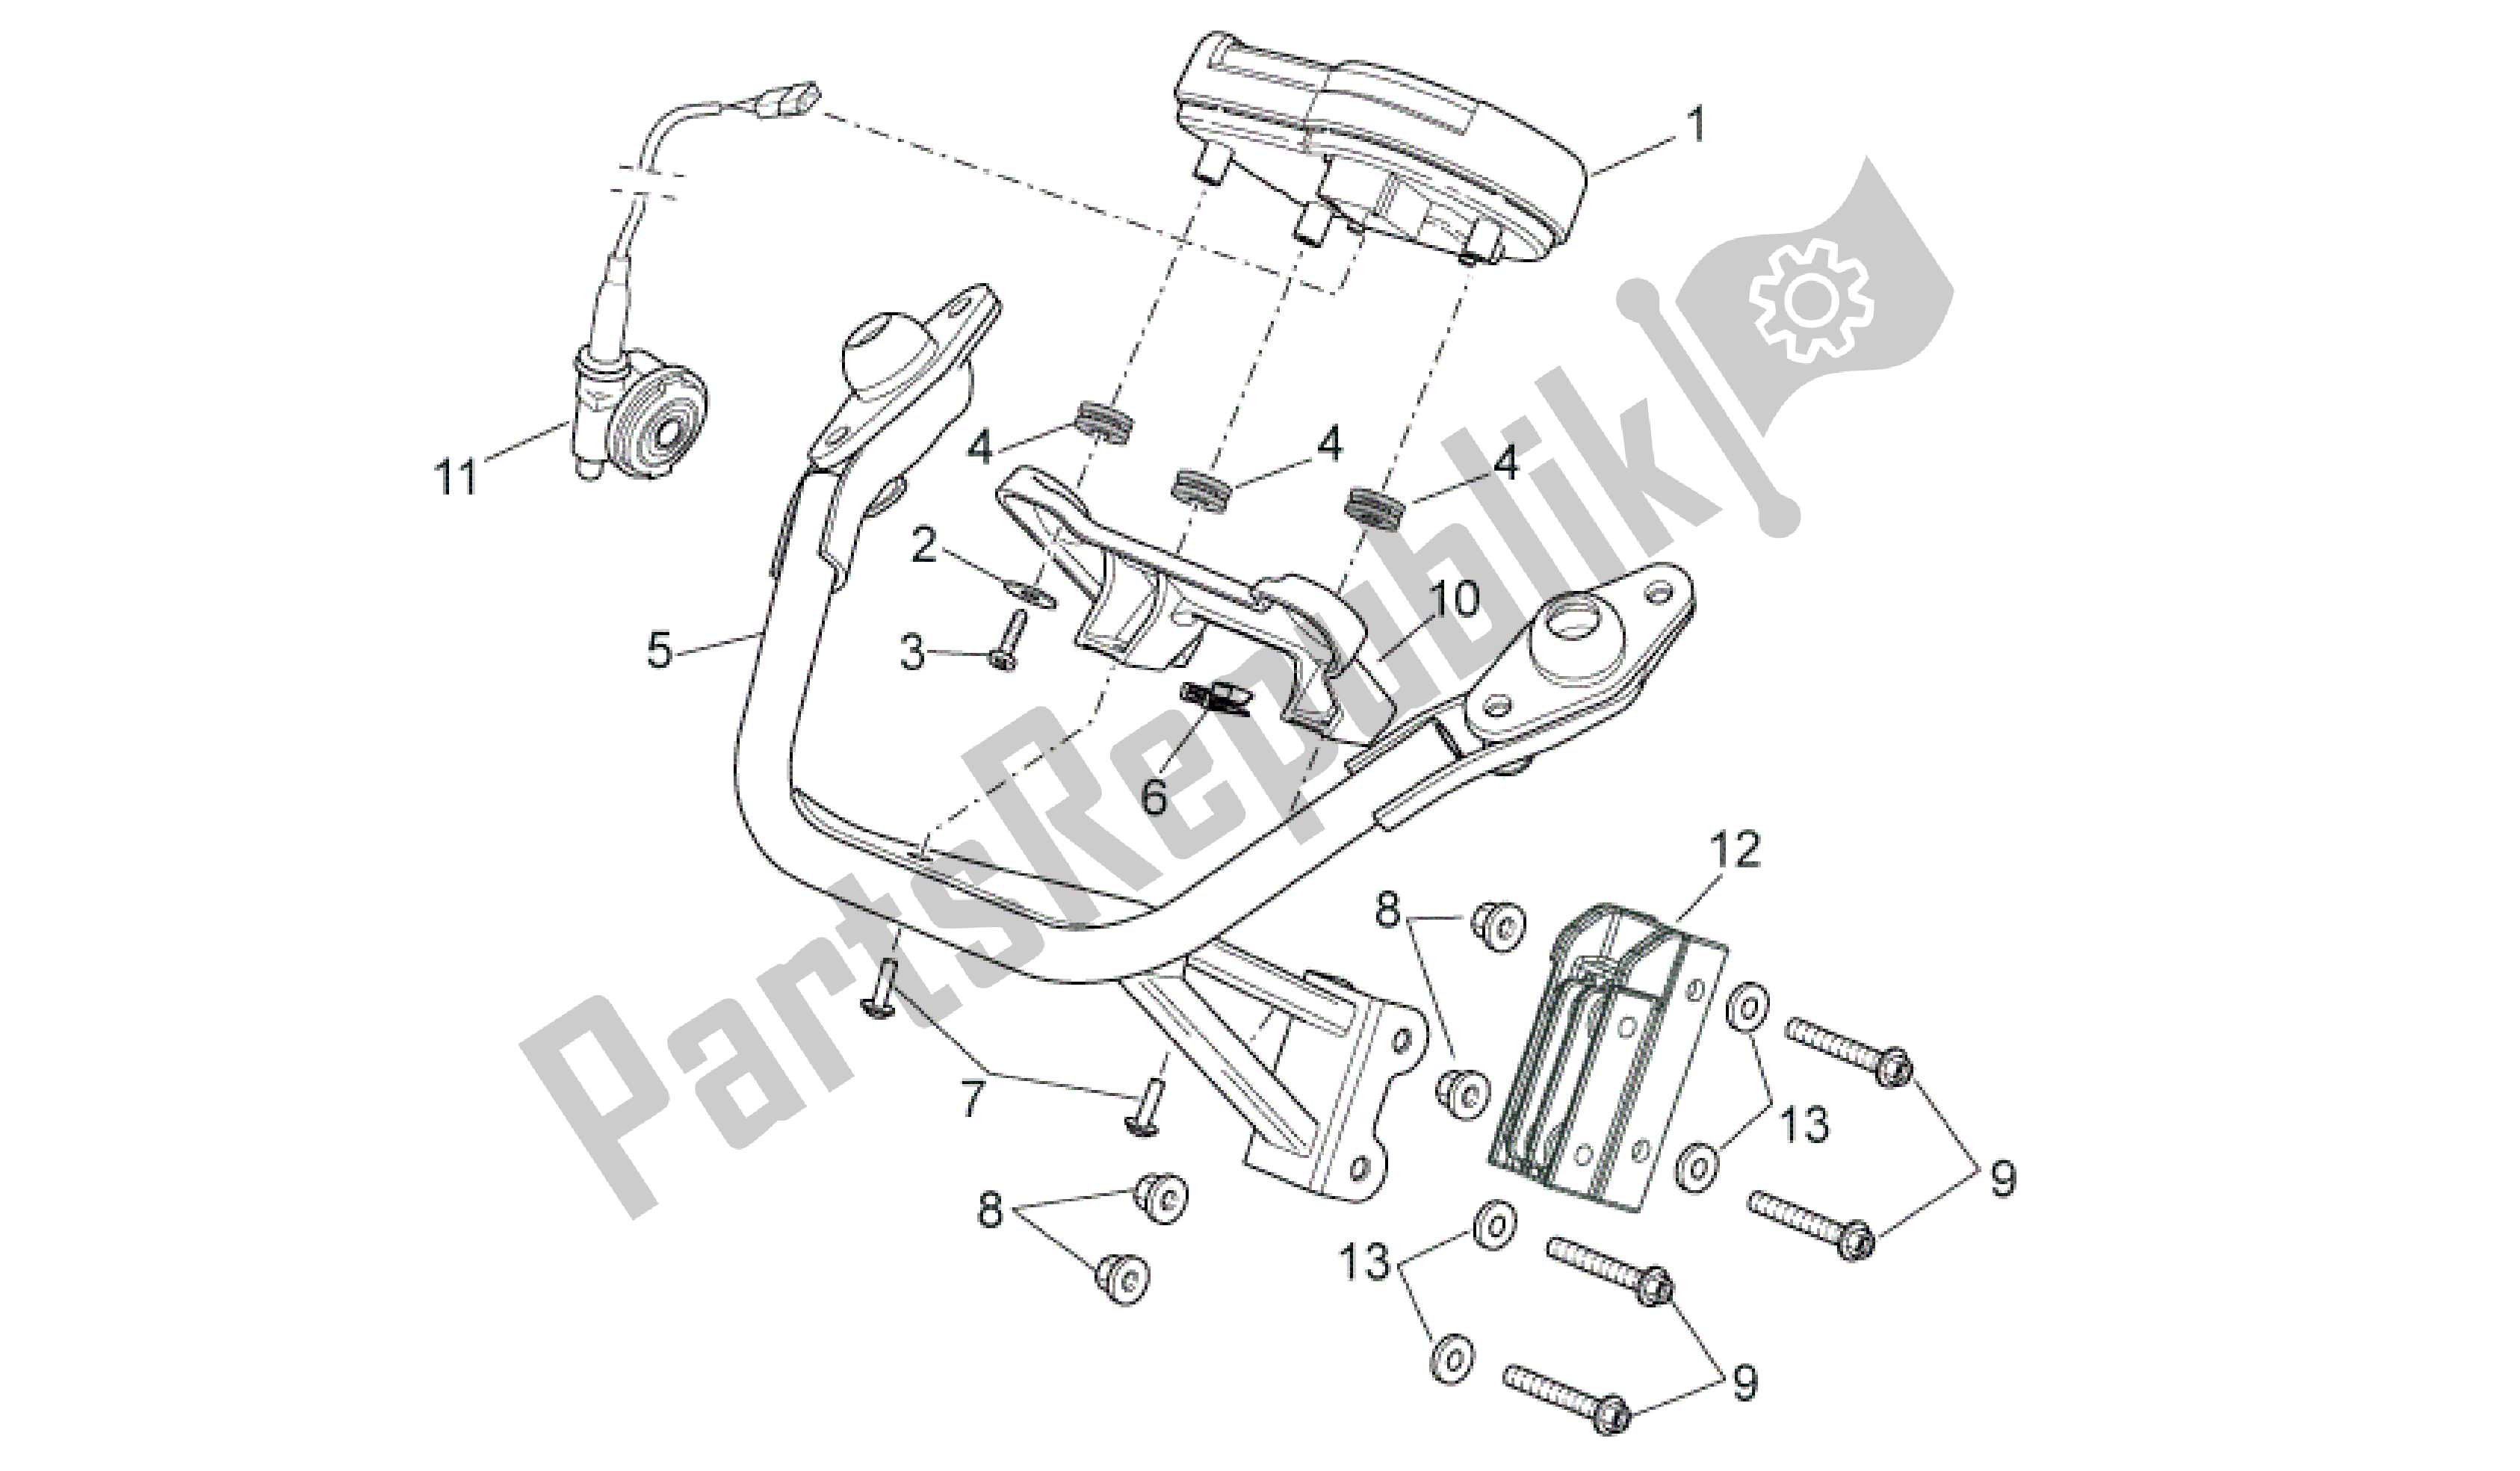 All parts for the Dashboard of the Aprilia RS 50 2006 - 2010